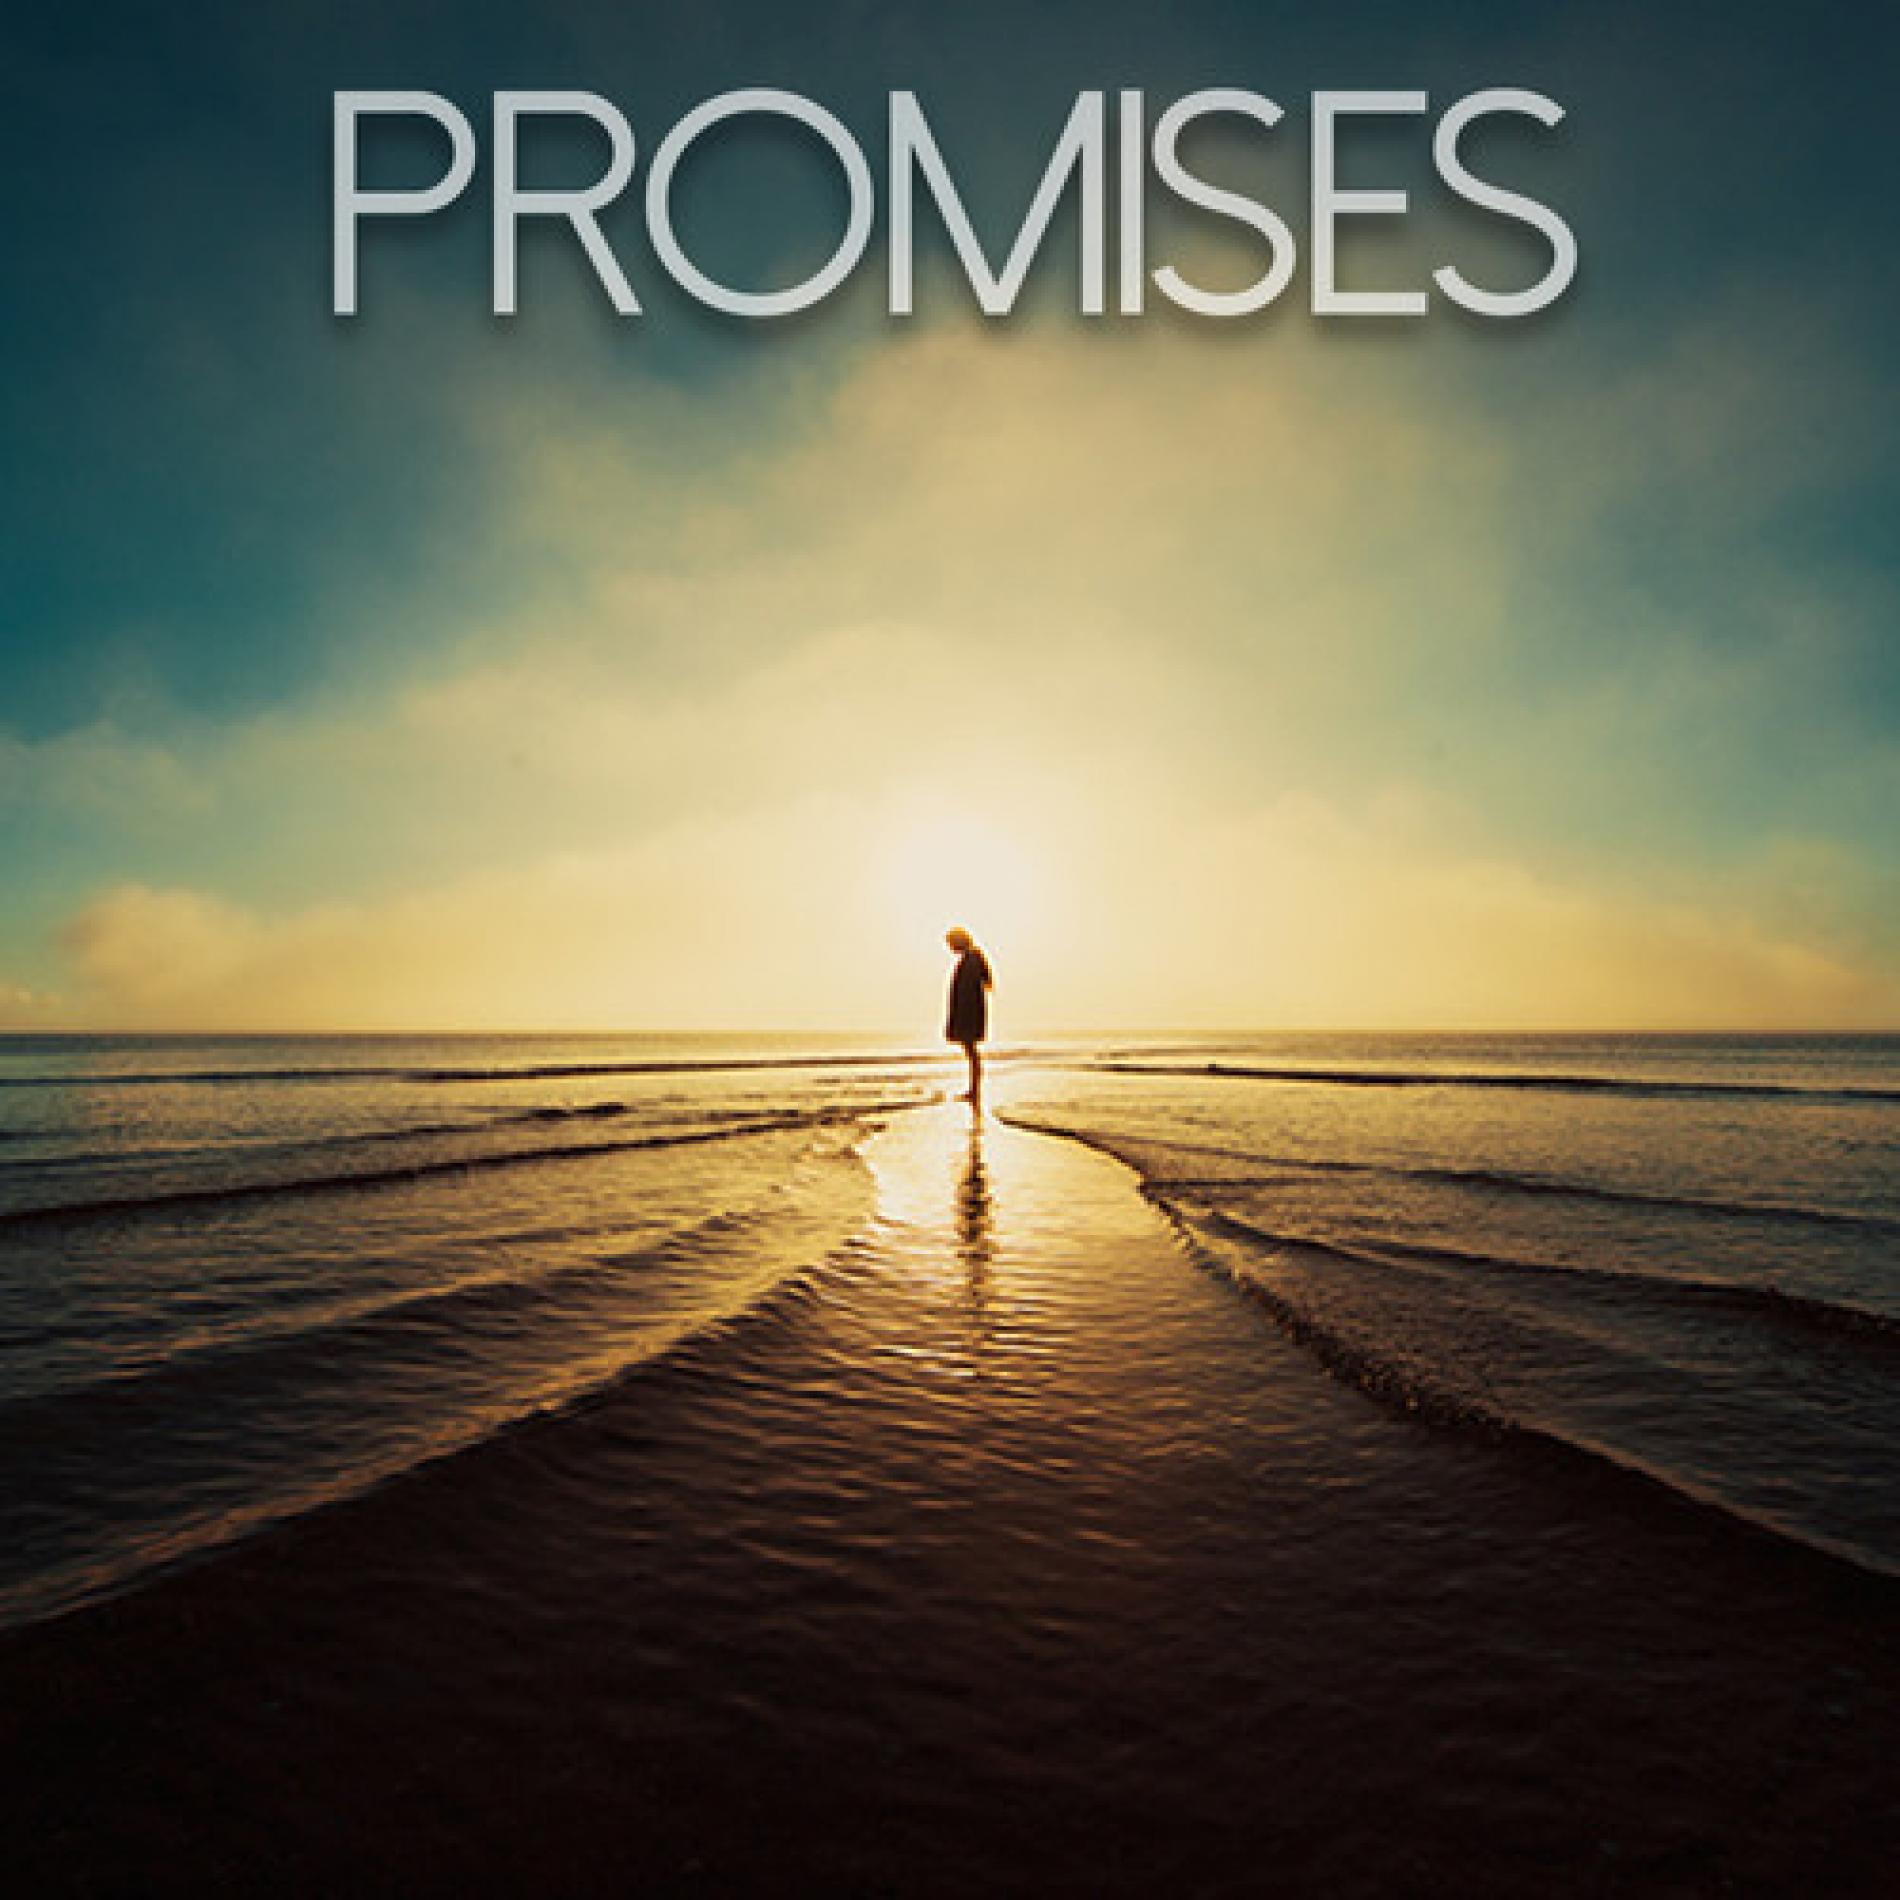 New Music: Promises By “Dropwizz”